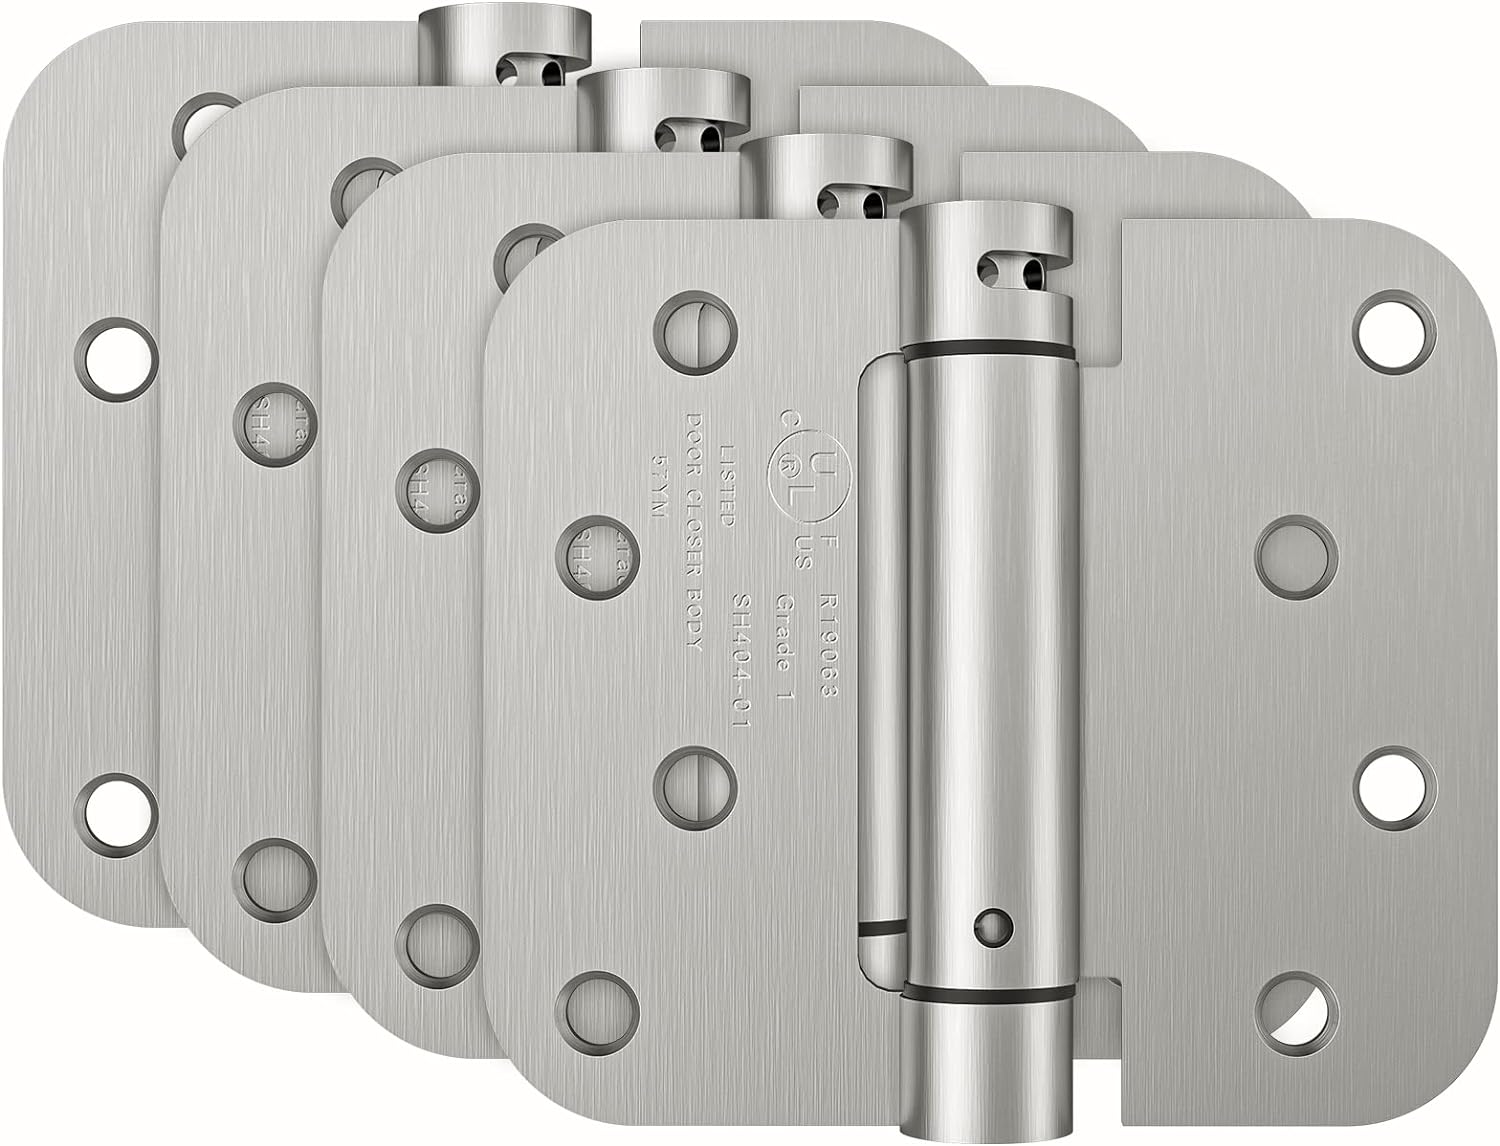 Self Closing Door Hinges 3.5 Inch, Spring Loaded Hinges, Adjustable Tension for Interior Door, UL Listed, for Left and Right Hand Door, 5/8'' Radius Corners, Brushed Nickel, 3 Pack